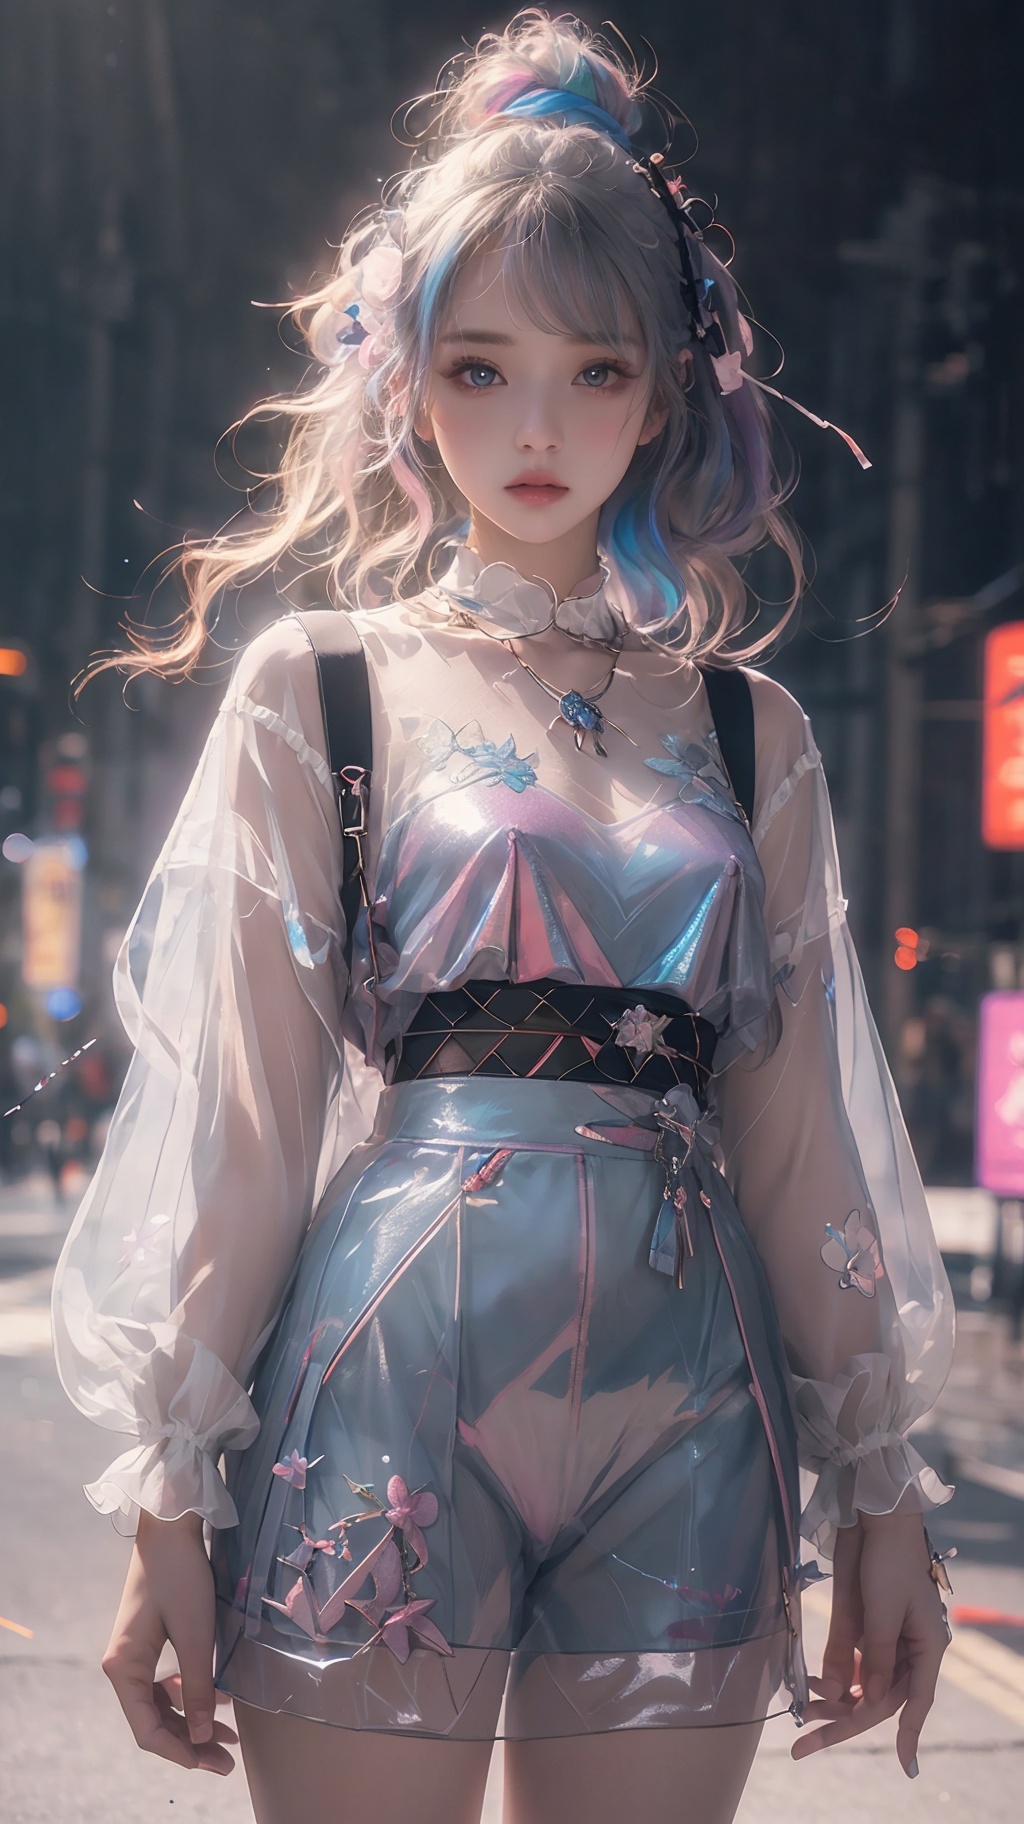 Best quality,masterpiece,transparent color PVC clothing,transparent color vinyl clothing,prismatic,holographic,chromatic aberration,fashion illustration,masterpiece,girl with harajuku fashion,looking at viewer,8k,ultra detailed,pixiv,,